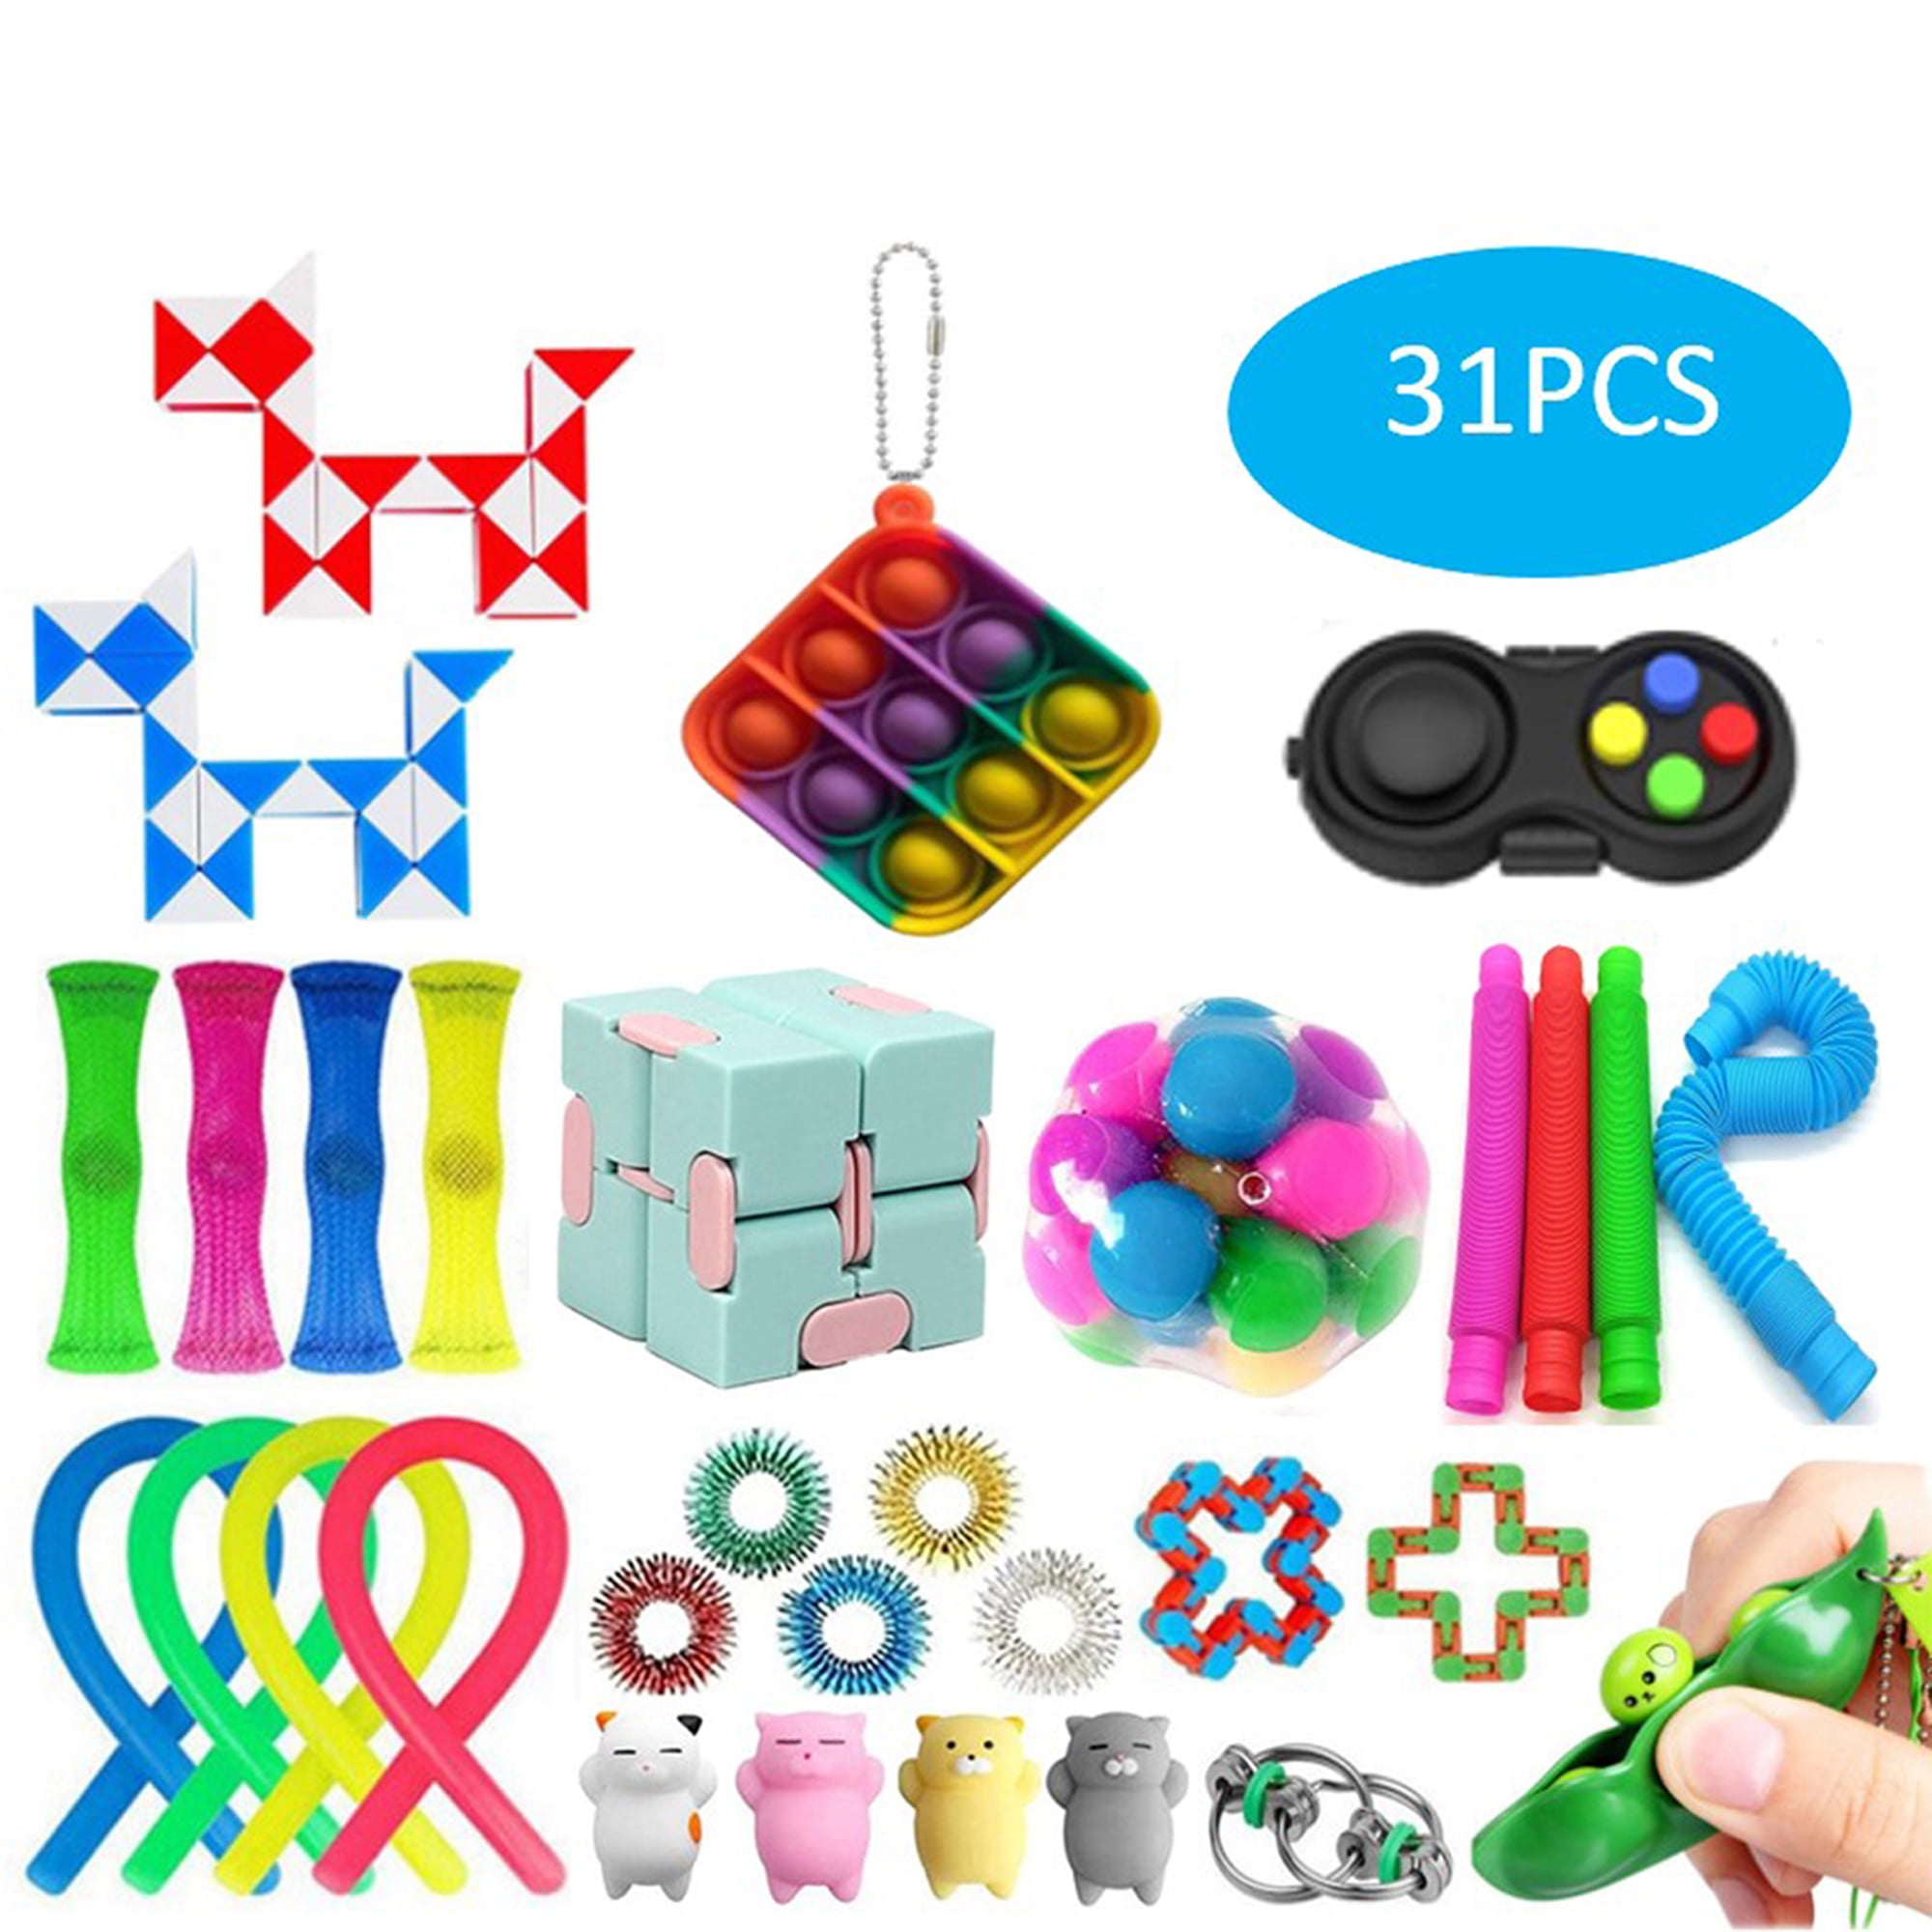 Controller Shaped Fidget Toys Simples-Dimples and Pop in its 2 Anxiety Toy Relieves Stress Anxiety for Kids Adults Tie Dye Silicone Sensory Push Bubble Popper Fidget Poppers 